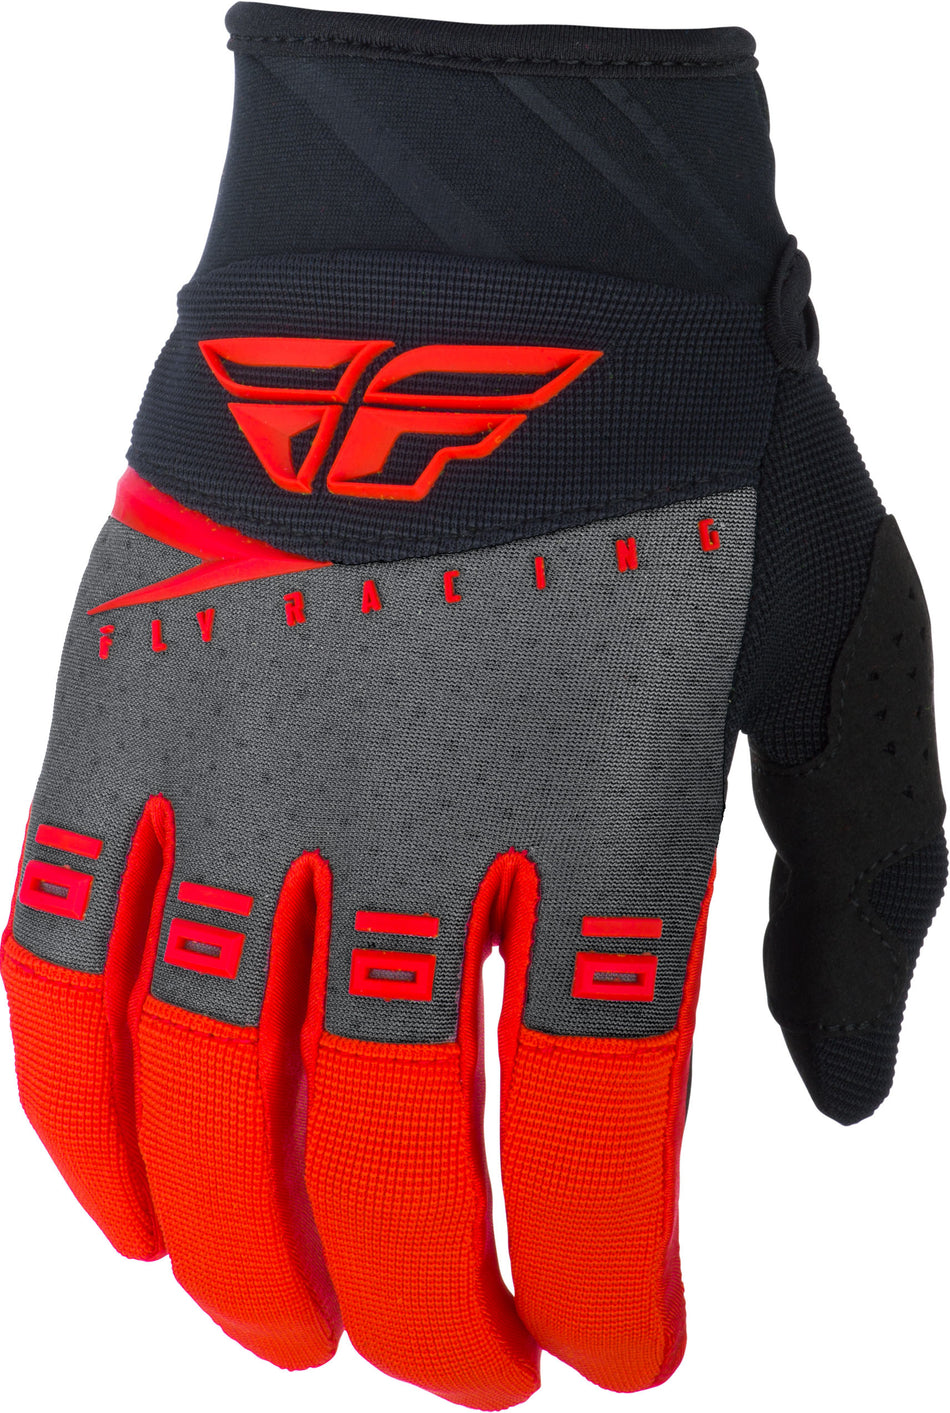 FLY RACING F-16 Gloves Red/Black Grey Sz 12 372-91212